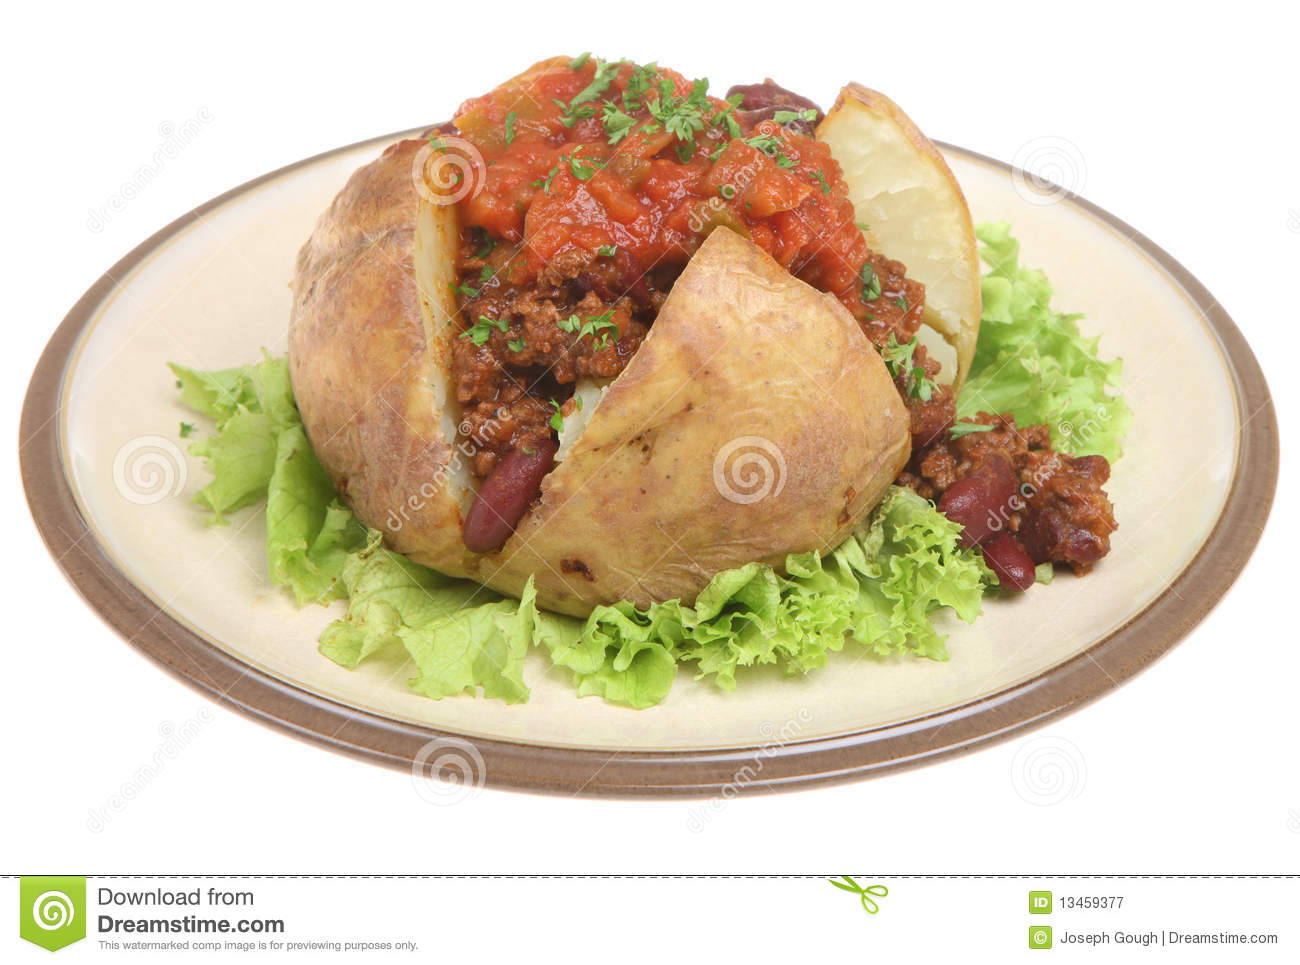 Baked Potato Filled With Chilli Con Carne And Tomato Salsa